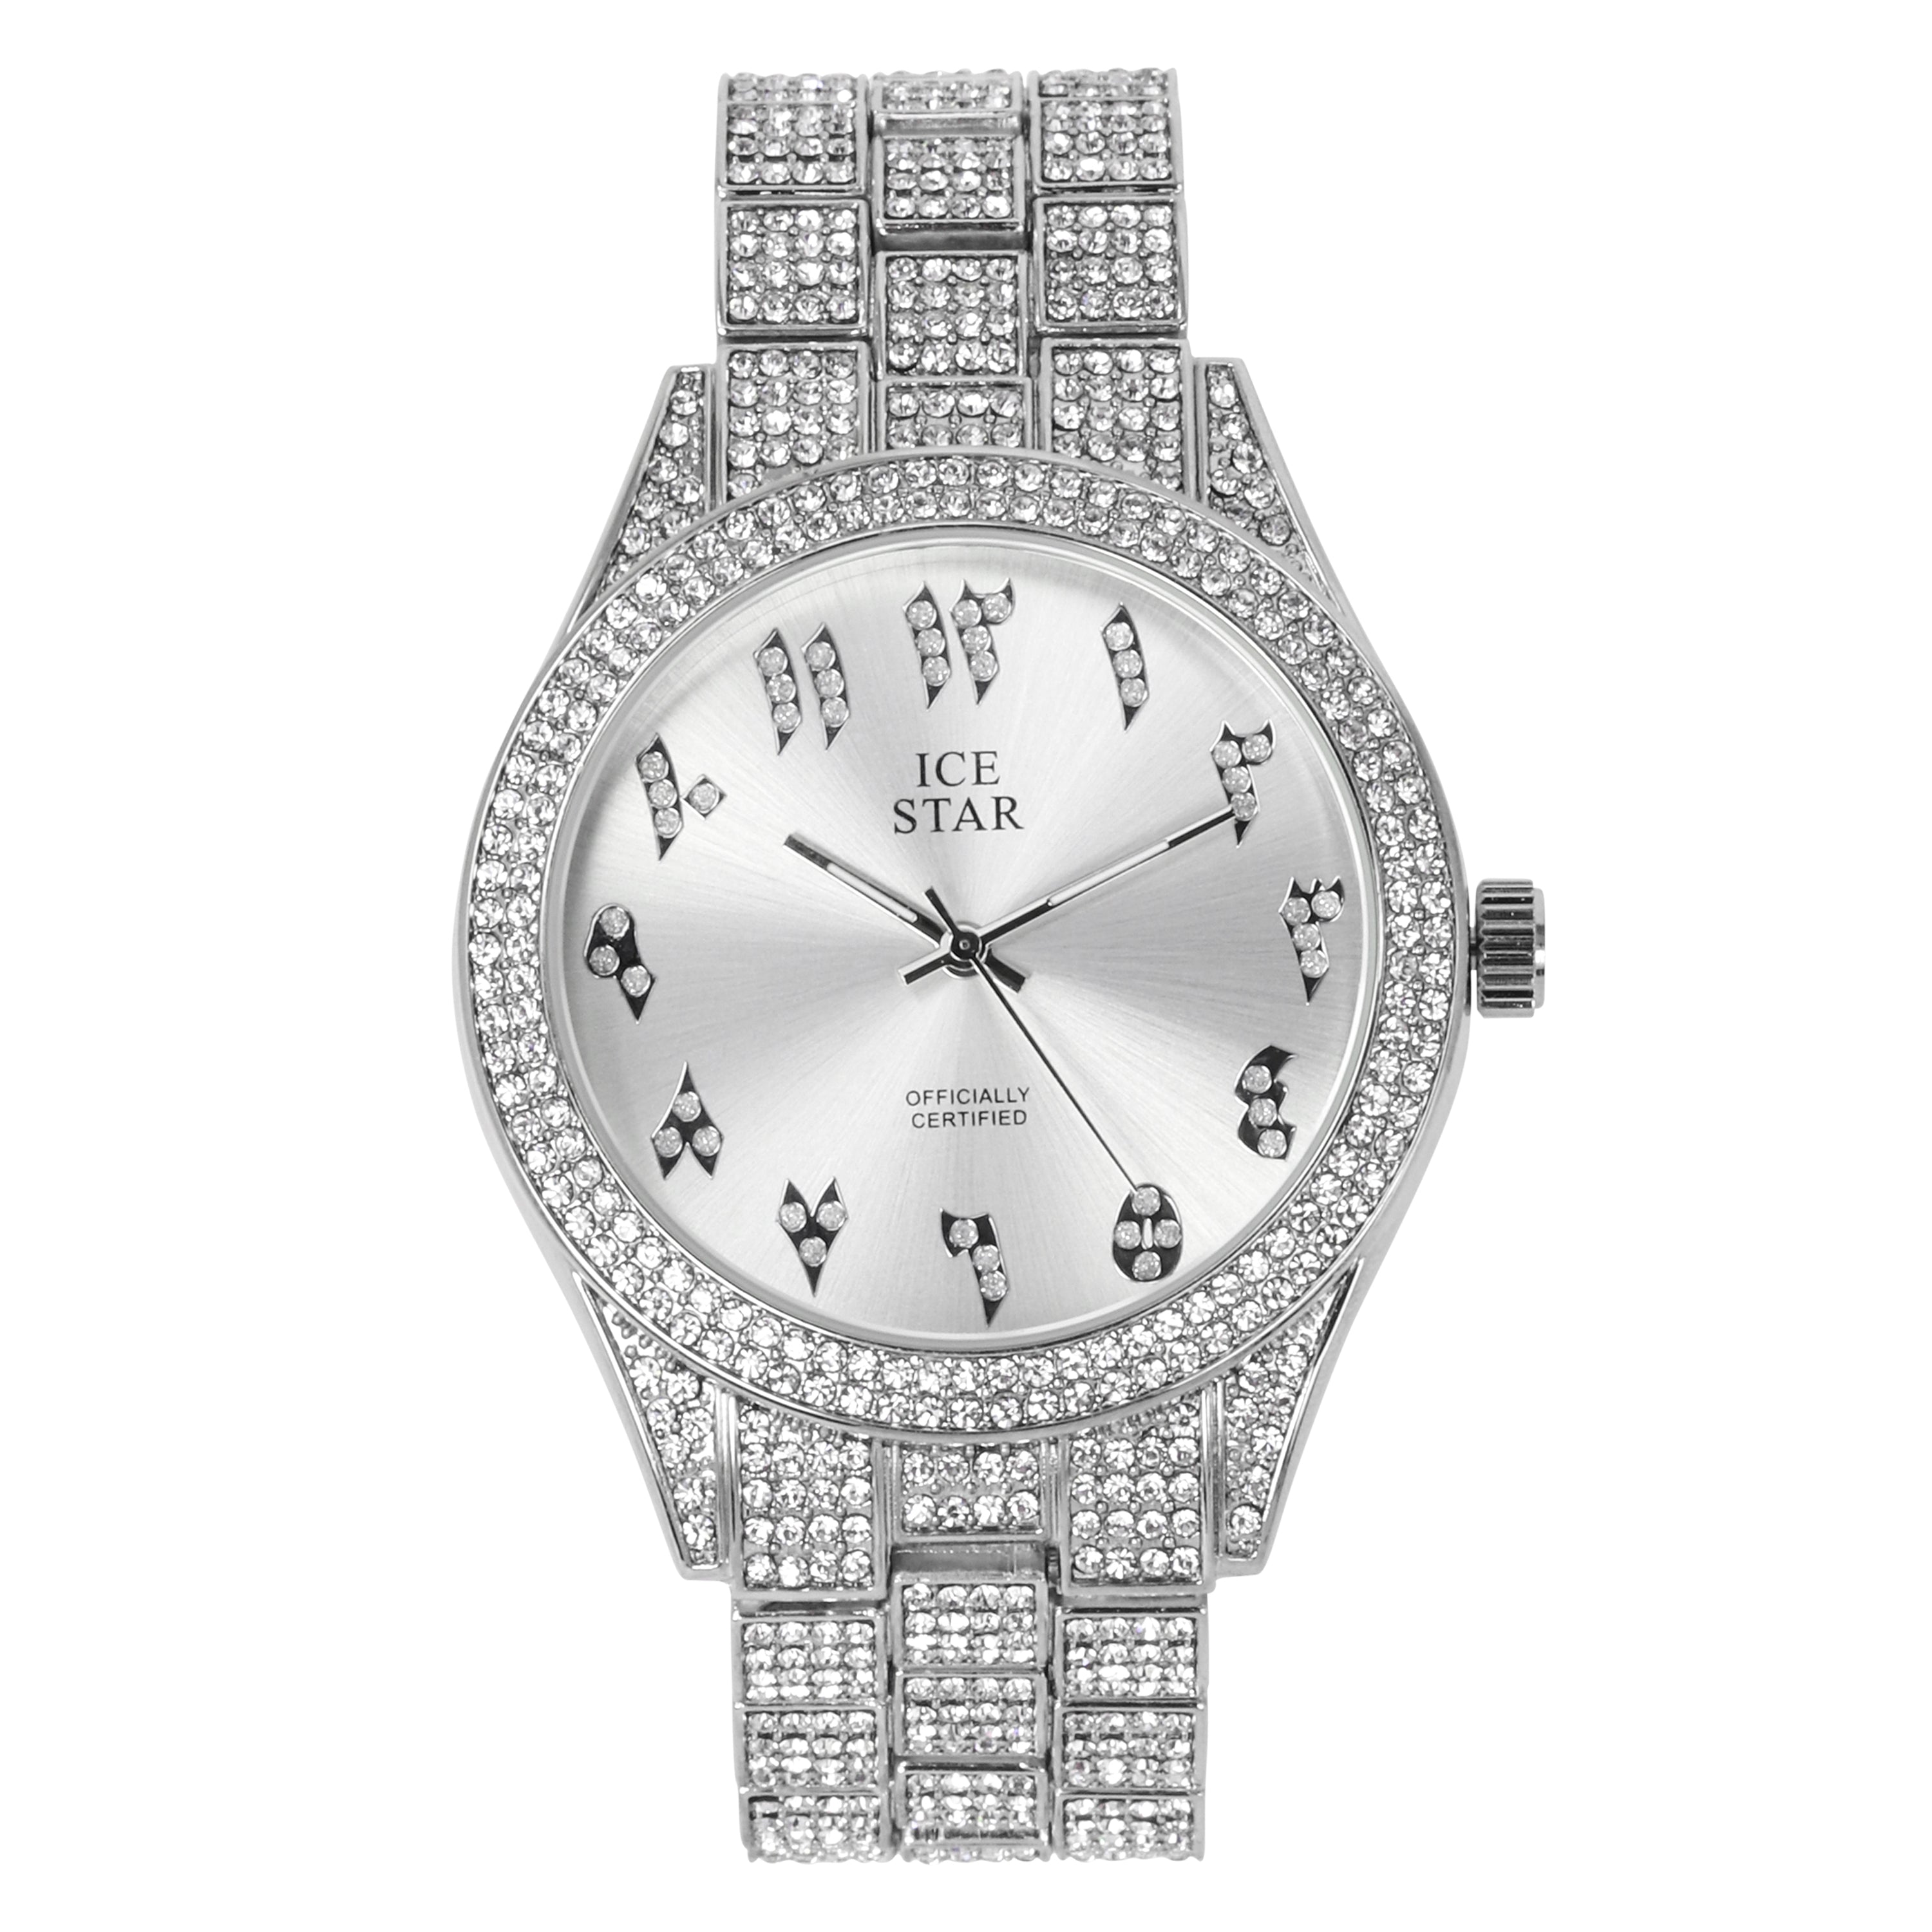 Men's Round Iced Out Watch 43mm Silver - Arabic Dial